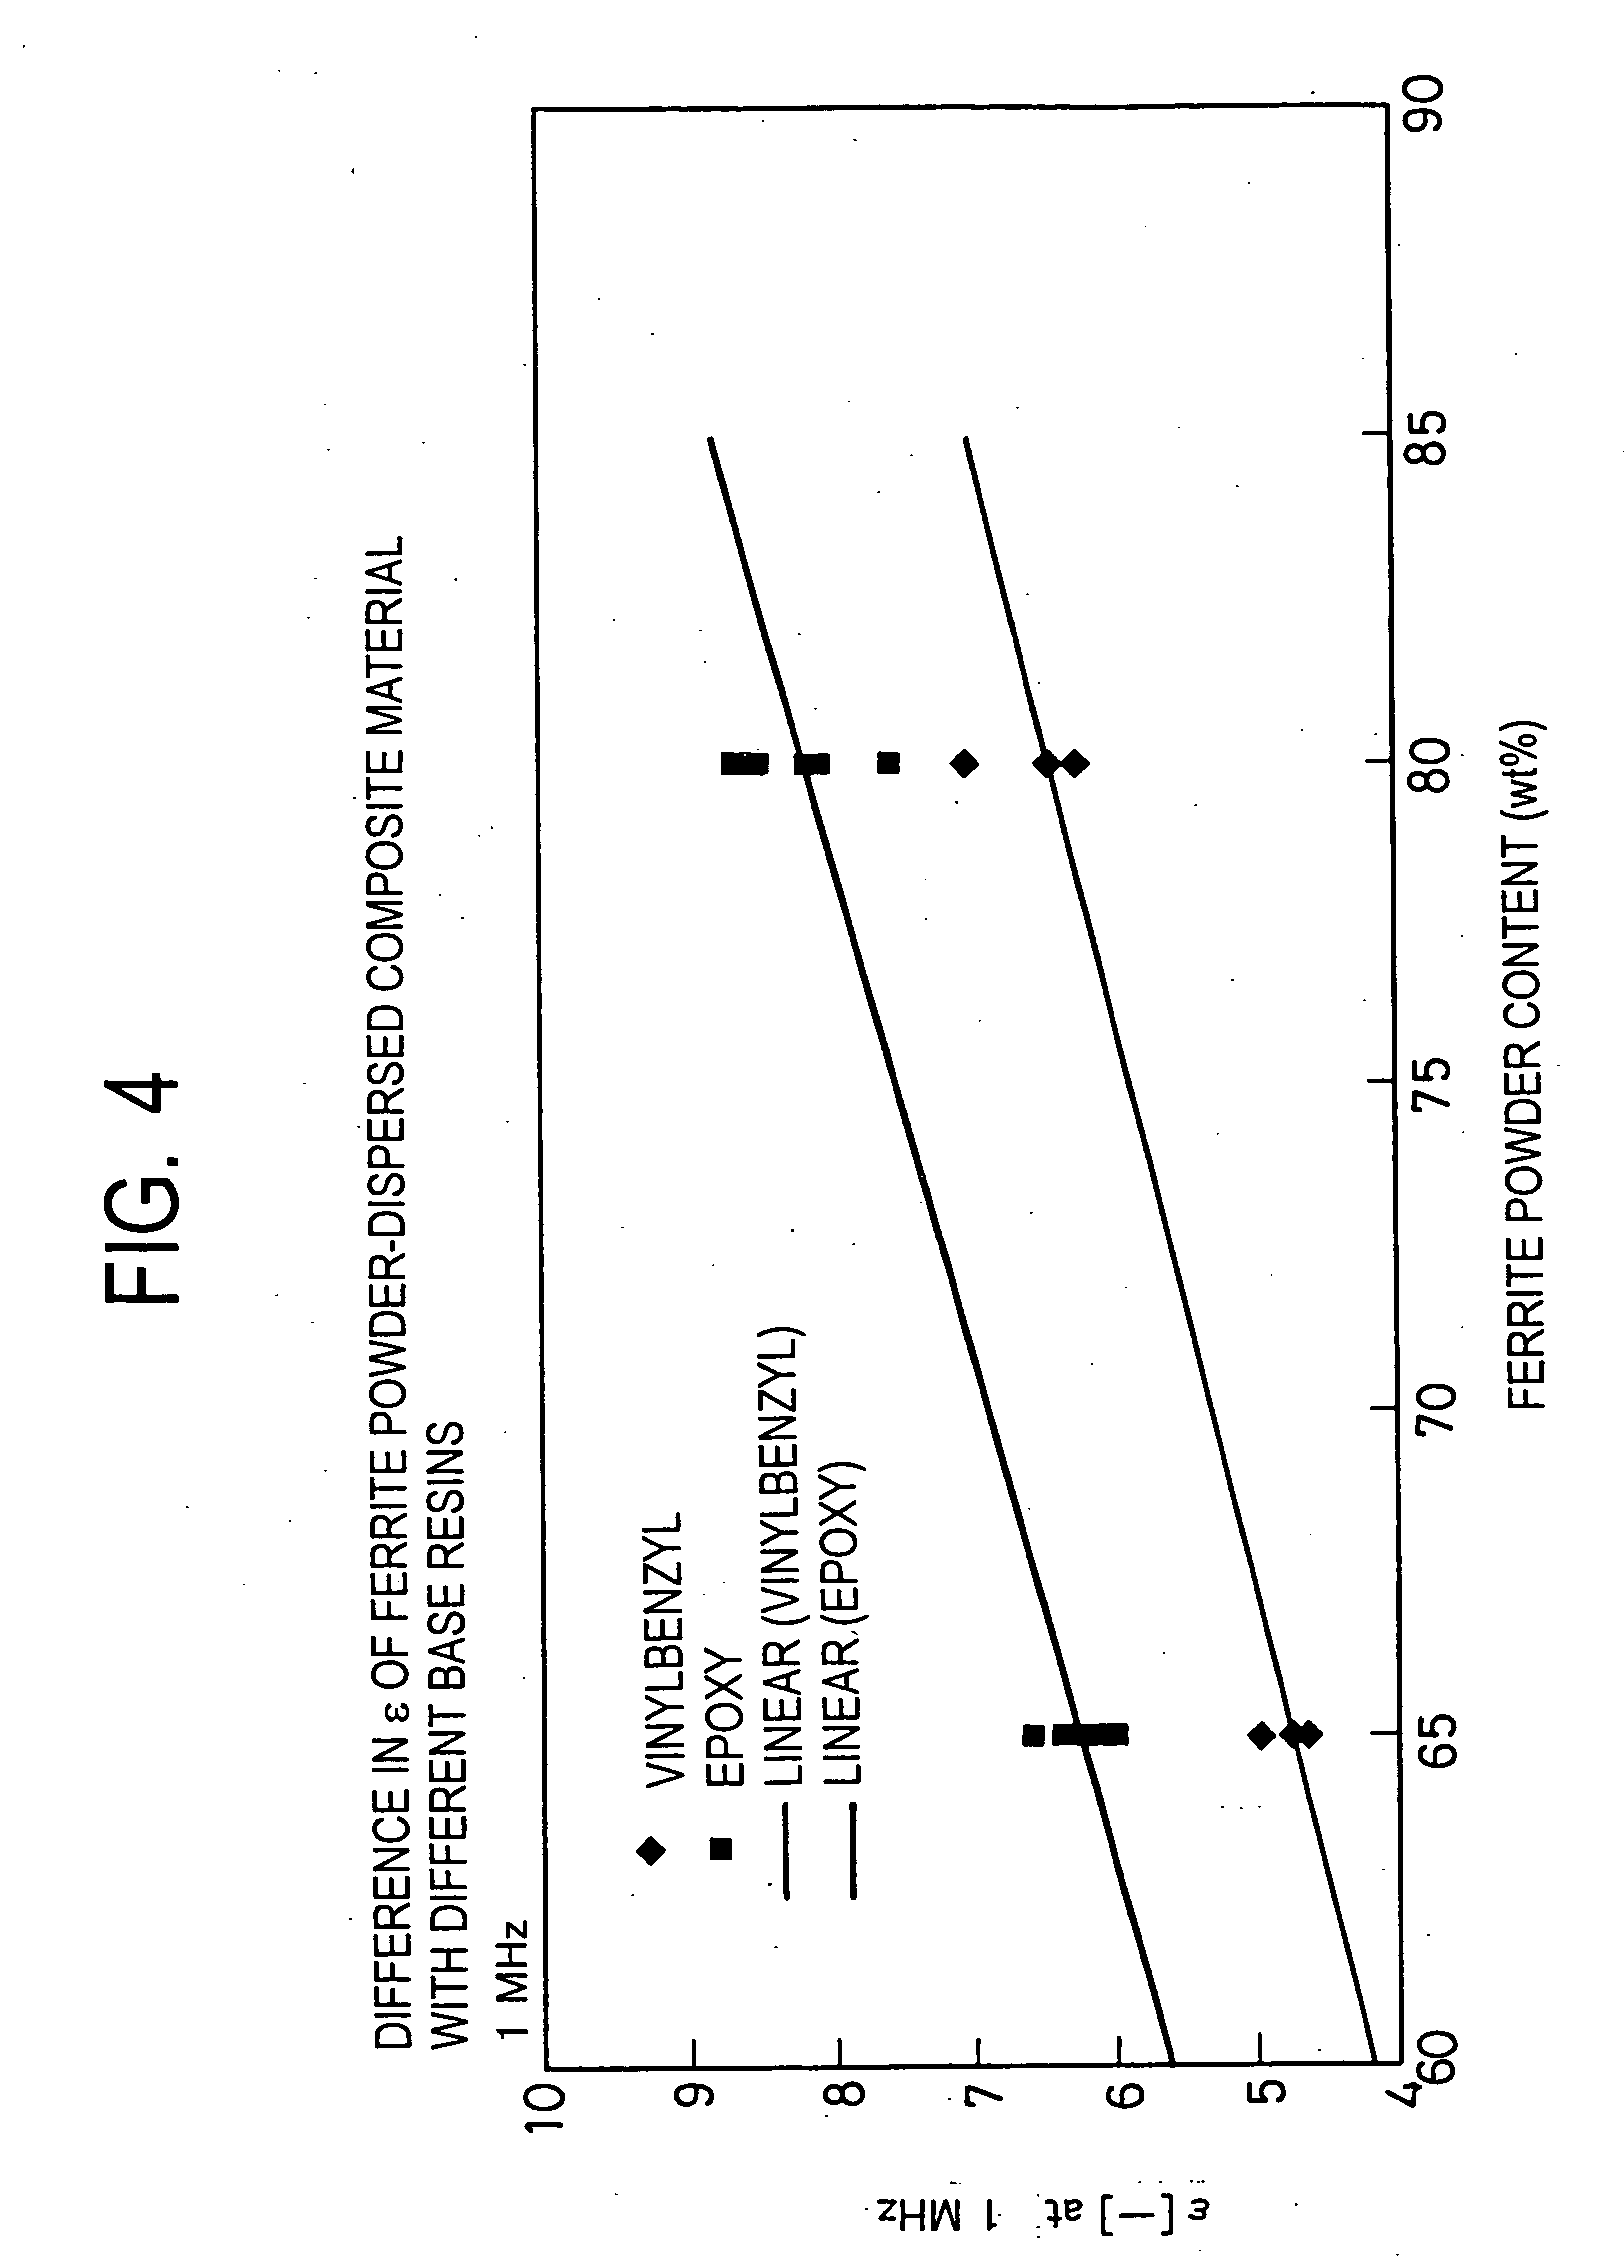 Composite dielectric material, composite dielectric substrate, prepreg, coated metal foil, molded sheet, composite magnetic substrate, substrate, double side metal foil-clad substrate, flame retardant substrate, polyvinylbenzyl ether resin composition, thermosetting polyvinylbenzyl ether resin composition, and method for preparing thermosetting polyvinylbenzyl ether resin composition